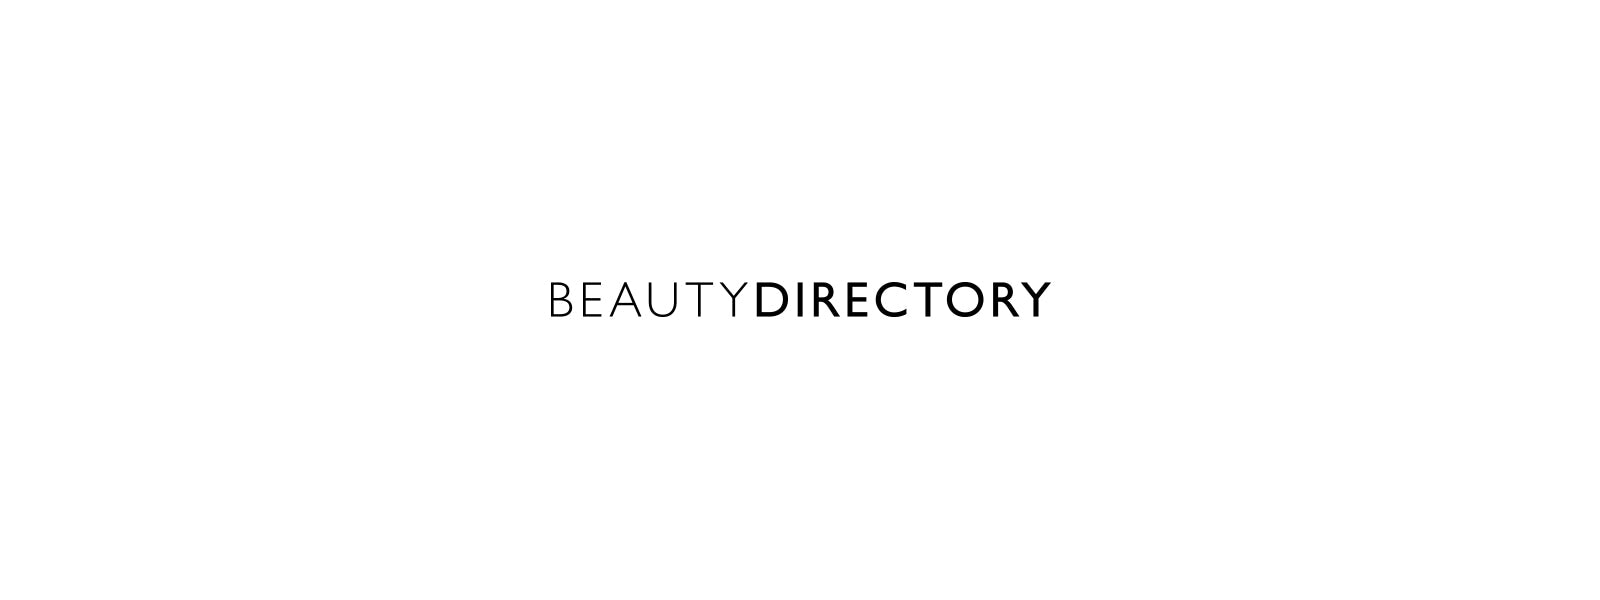 BEAUTYDIRECTORY – The Homegrown Brand Taking on the Beauty Giants